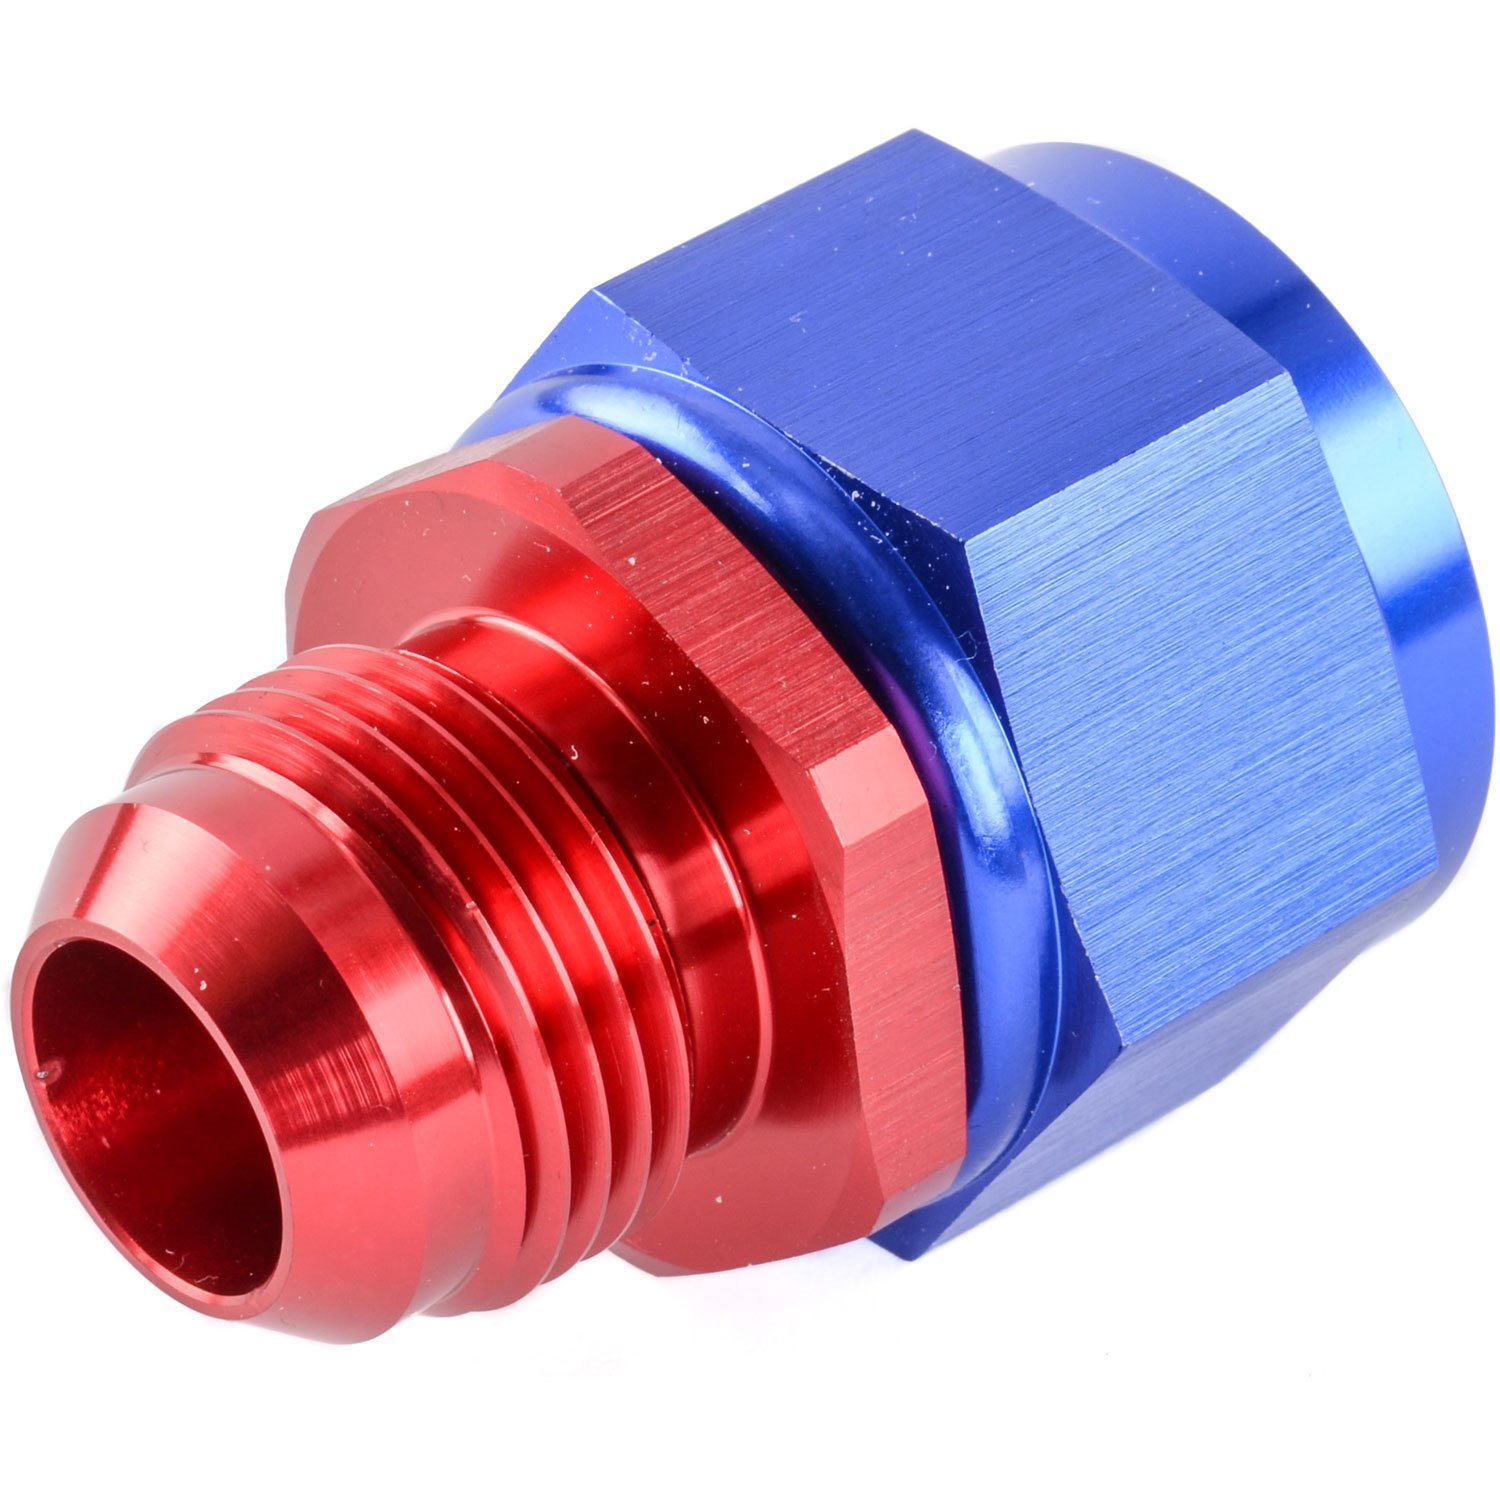 AN Female Swivel to Male Reducer Fitting [-16 AN Female to -12 AN Male, Blue/Red]